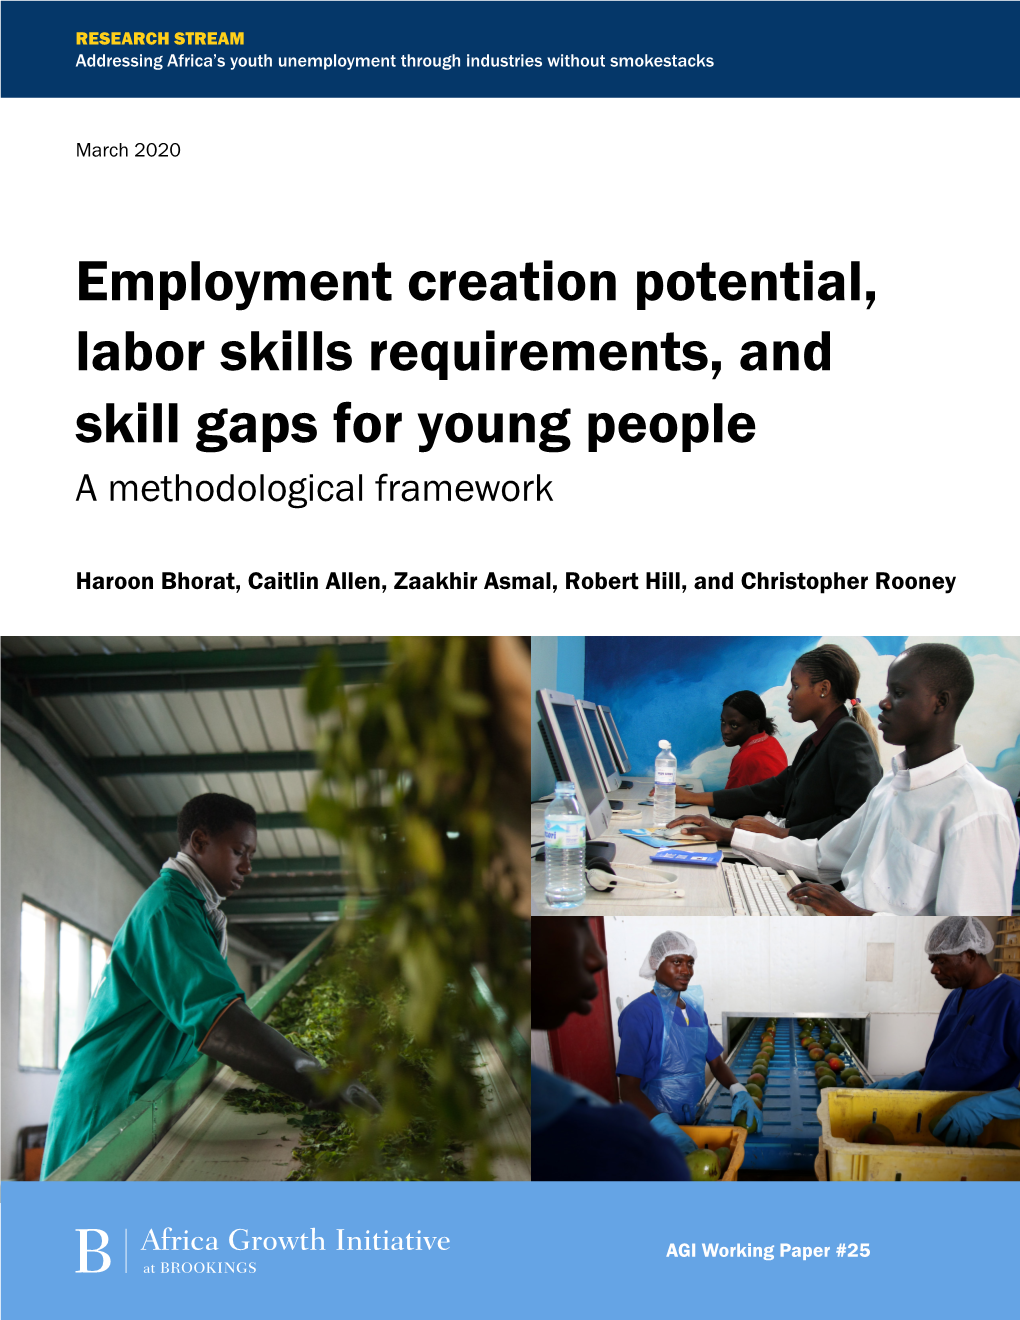 Employment Creation Potential, Labor Skills Requirements, and Skill Gaps for Young People a Methodological Framework